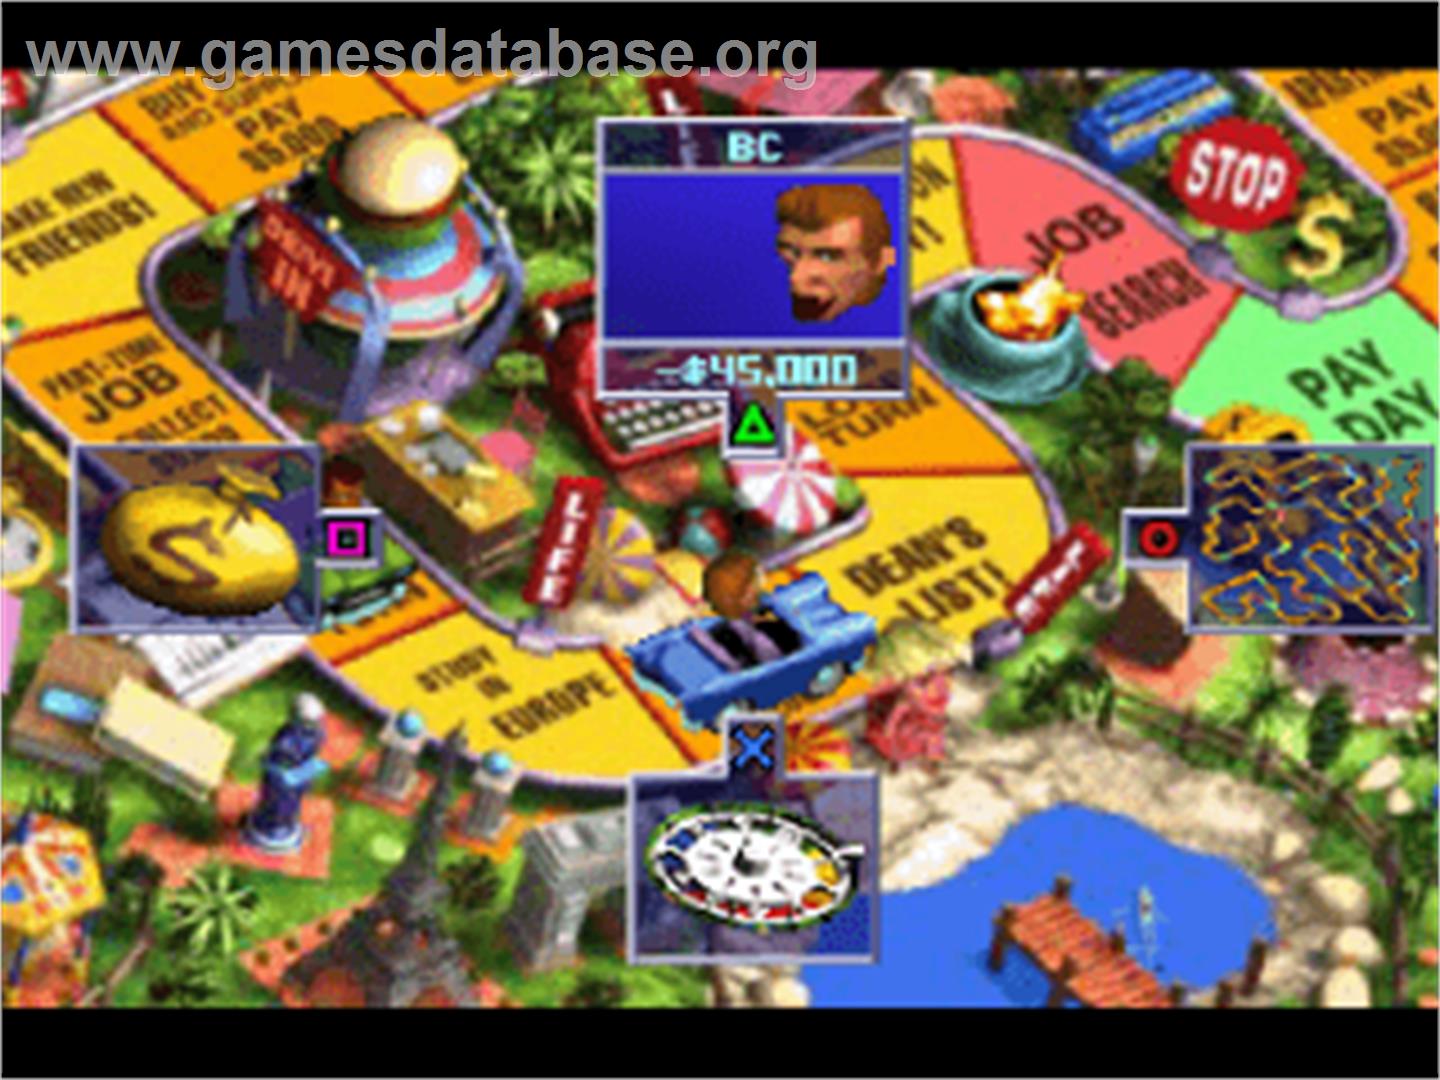 The Game of Life - Sony Playstation - Artwork - In Game